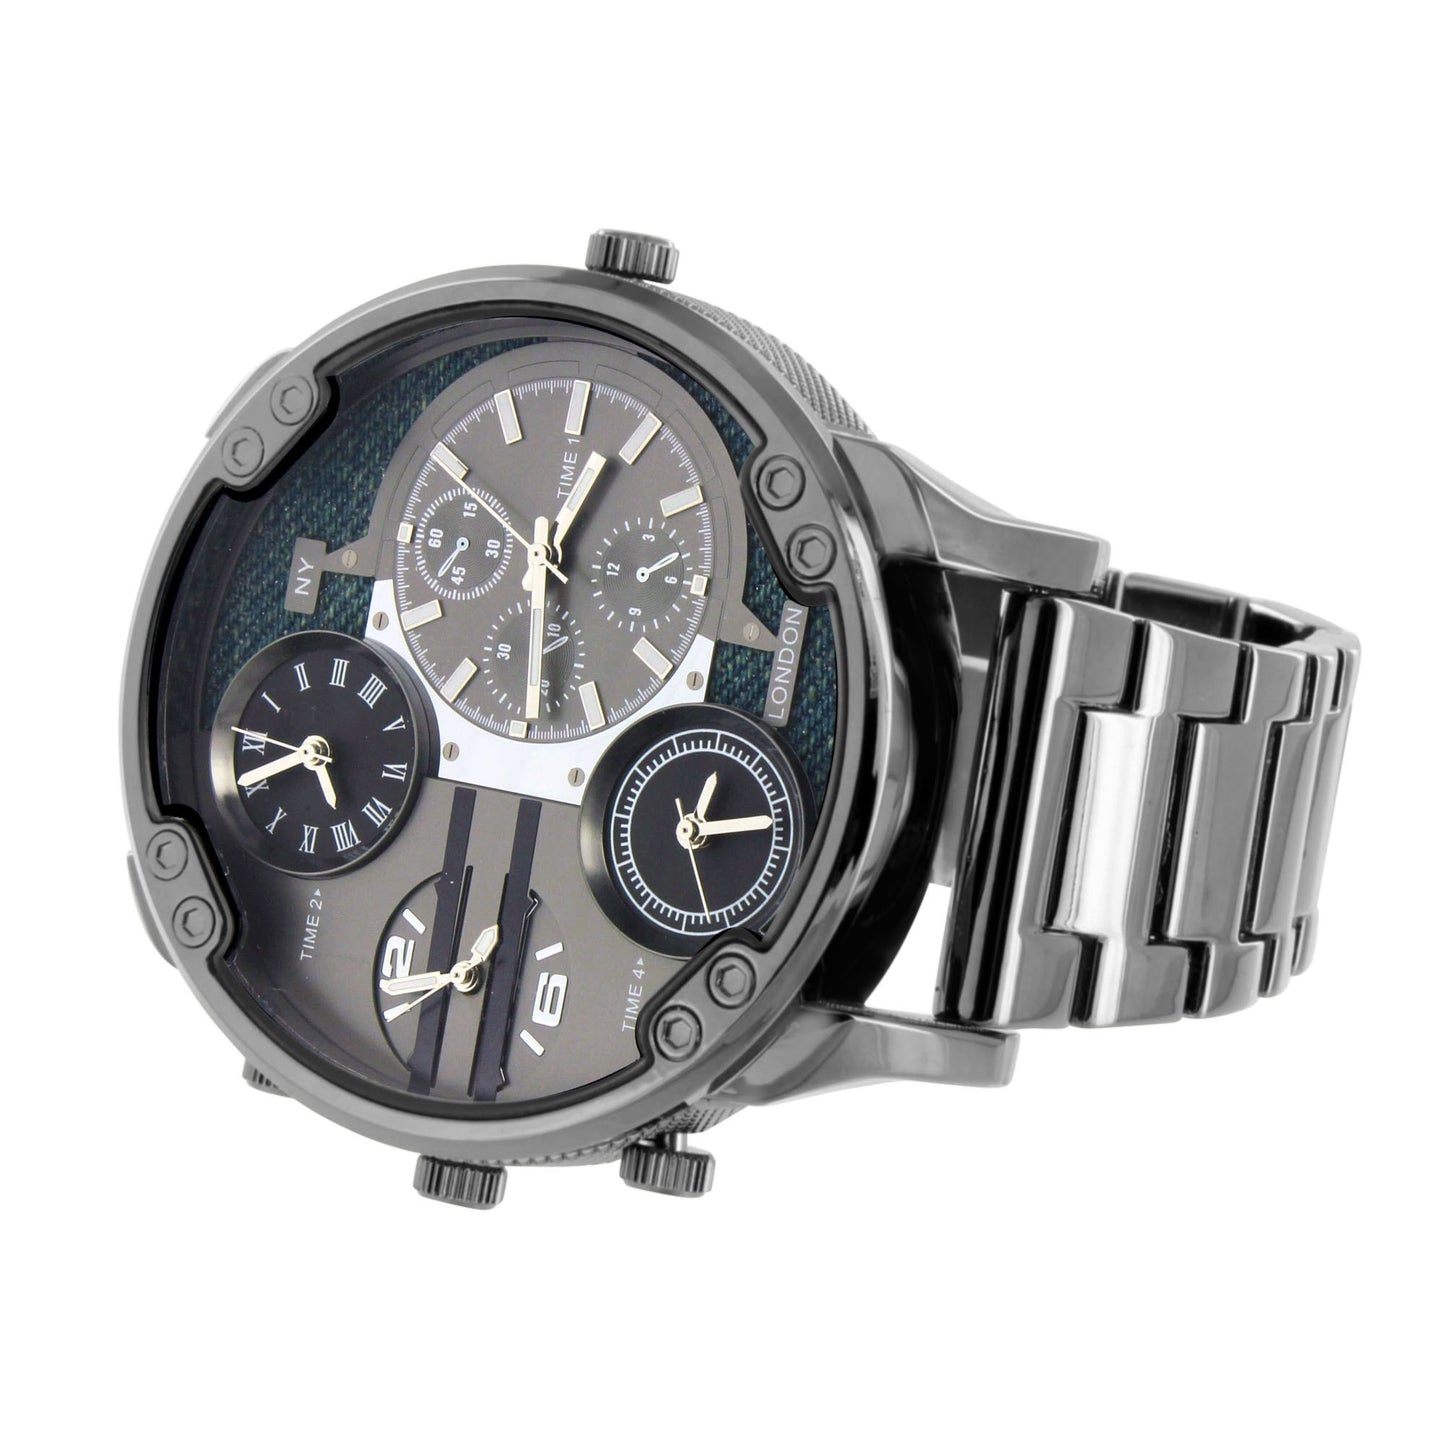 Black Finish Watch Stainless Steel Back Water Resistant